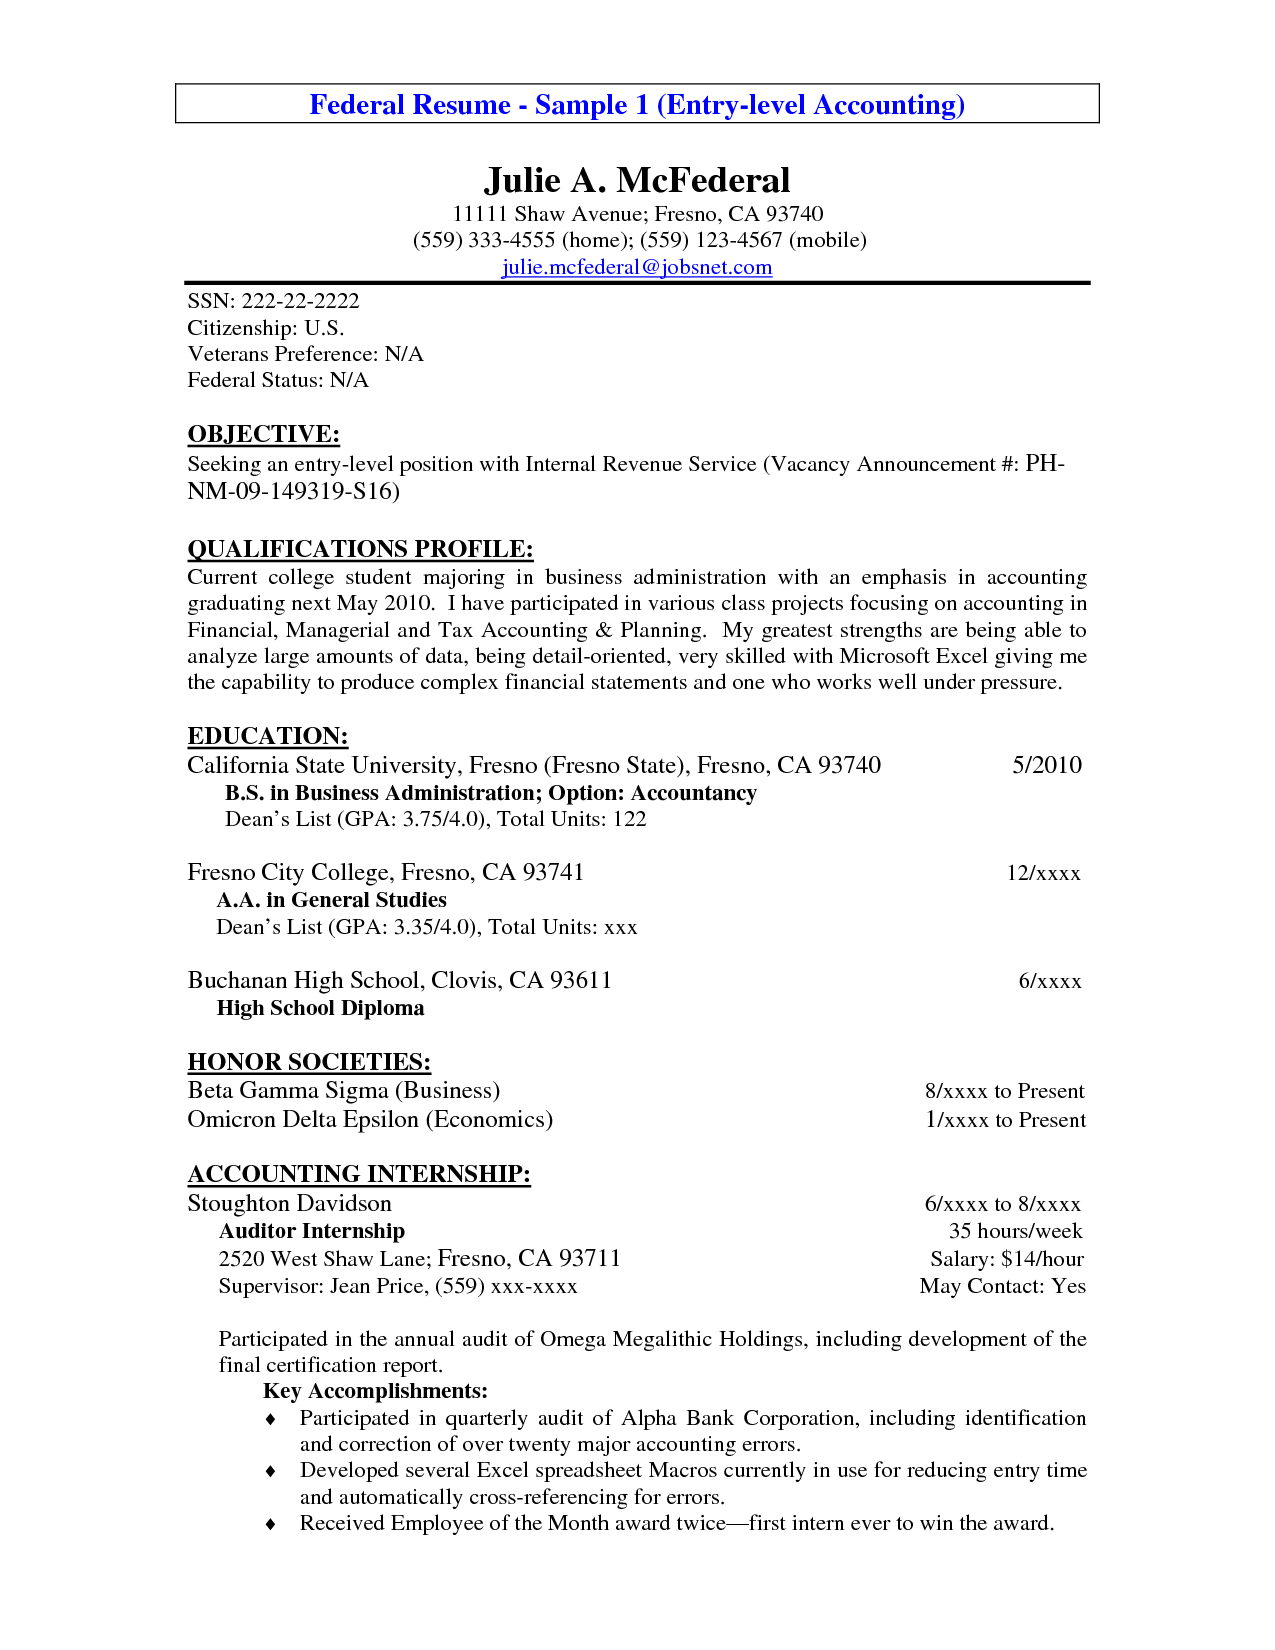 Accounting Resume Objective